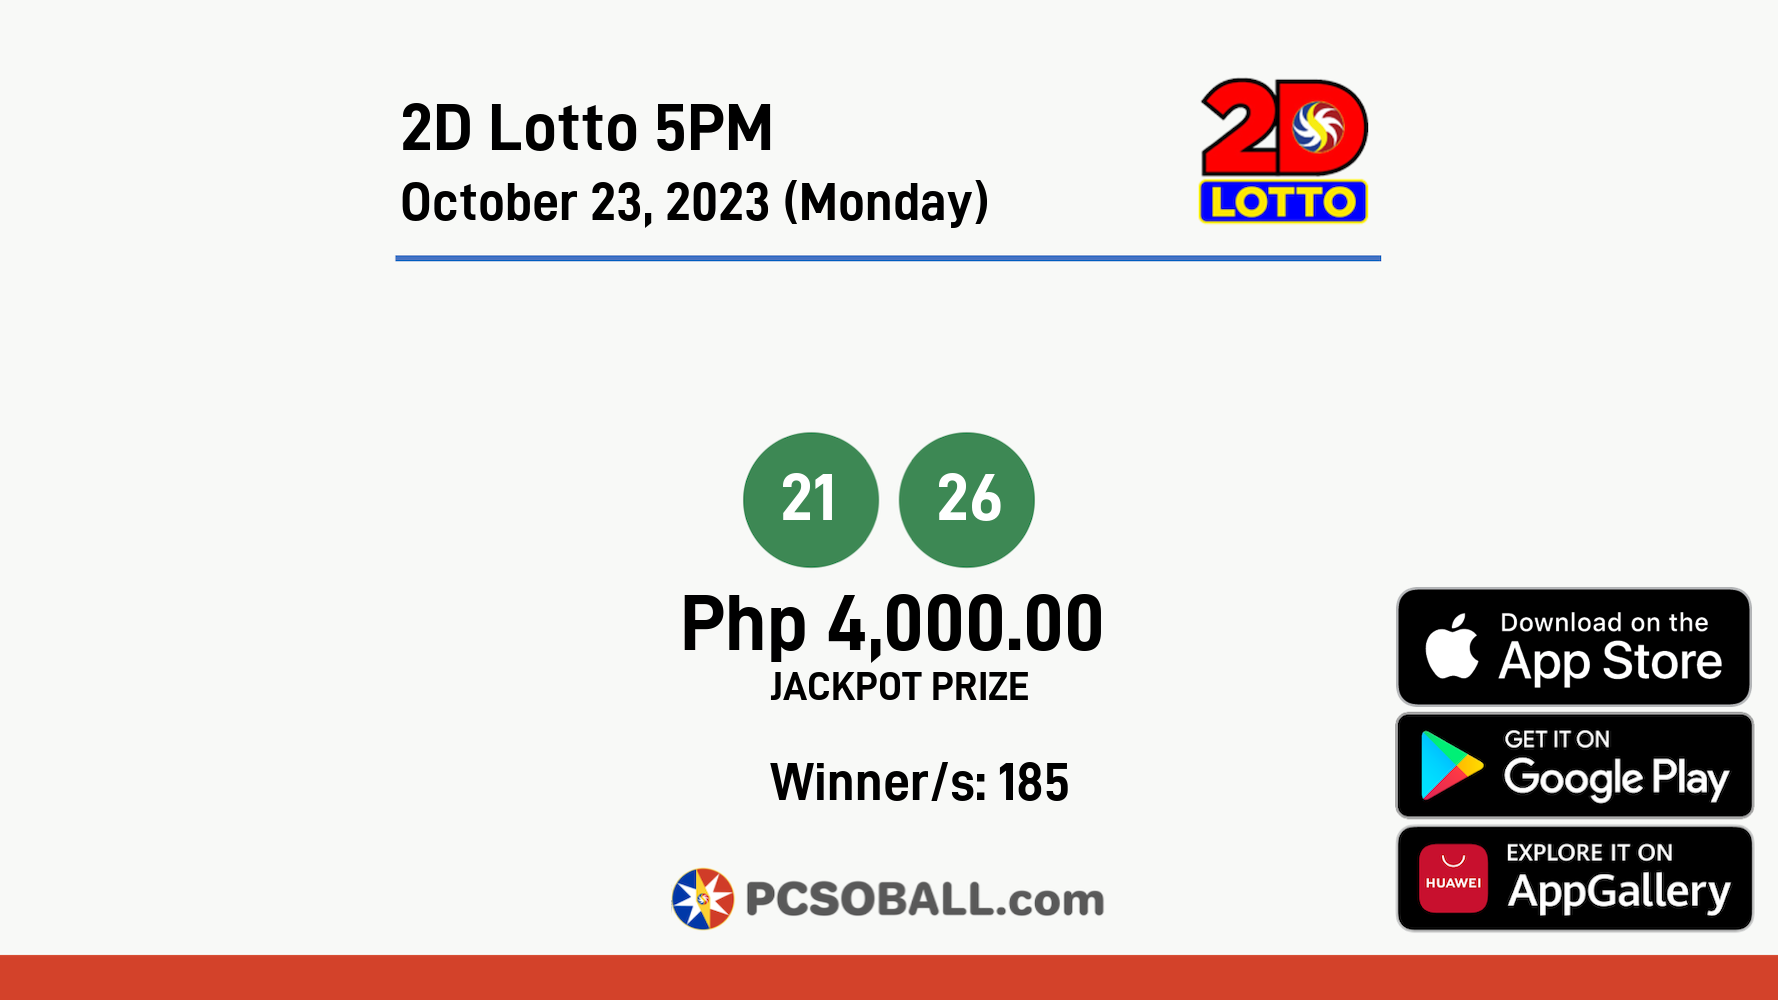 2D Lotto 5PM October 23, 2023 (Monday) Result